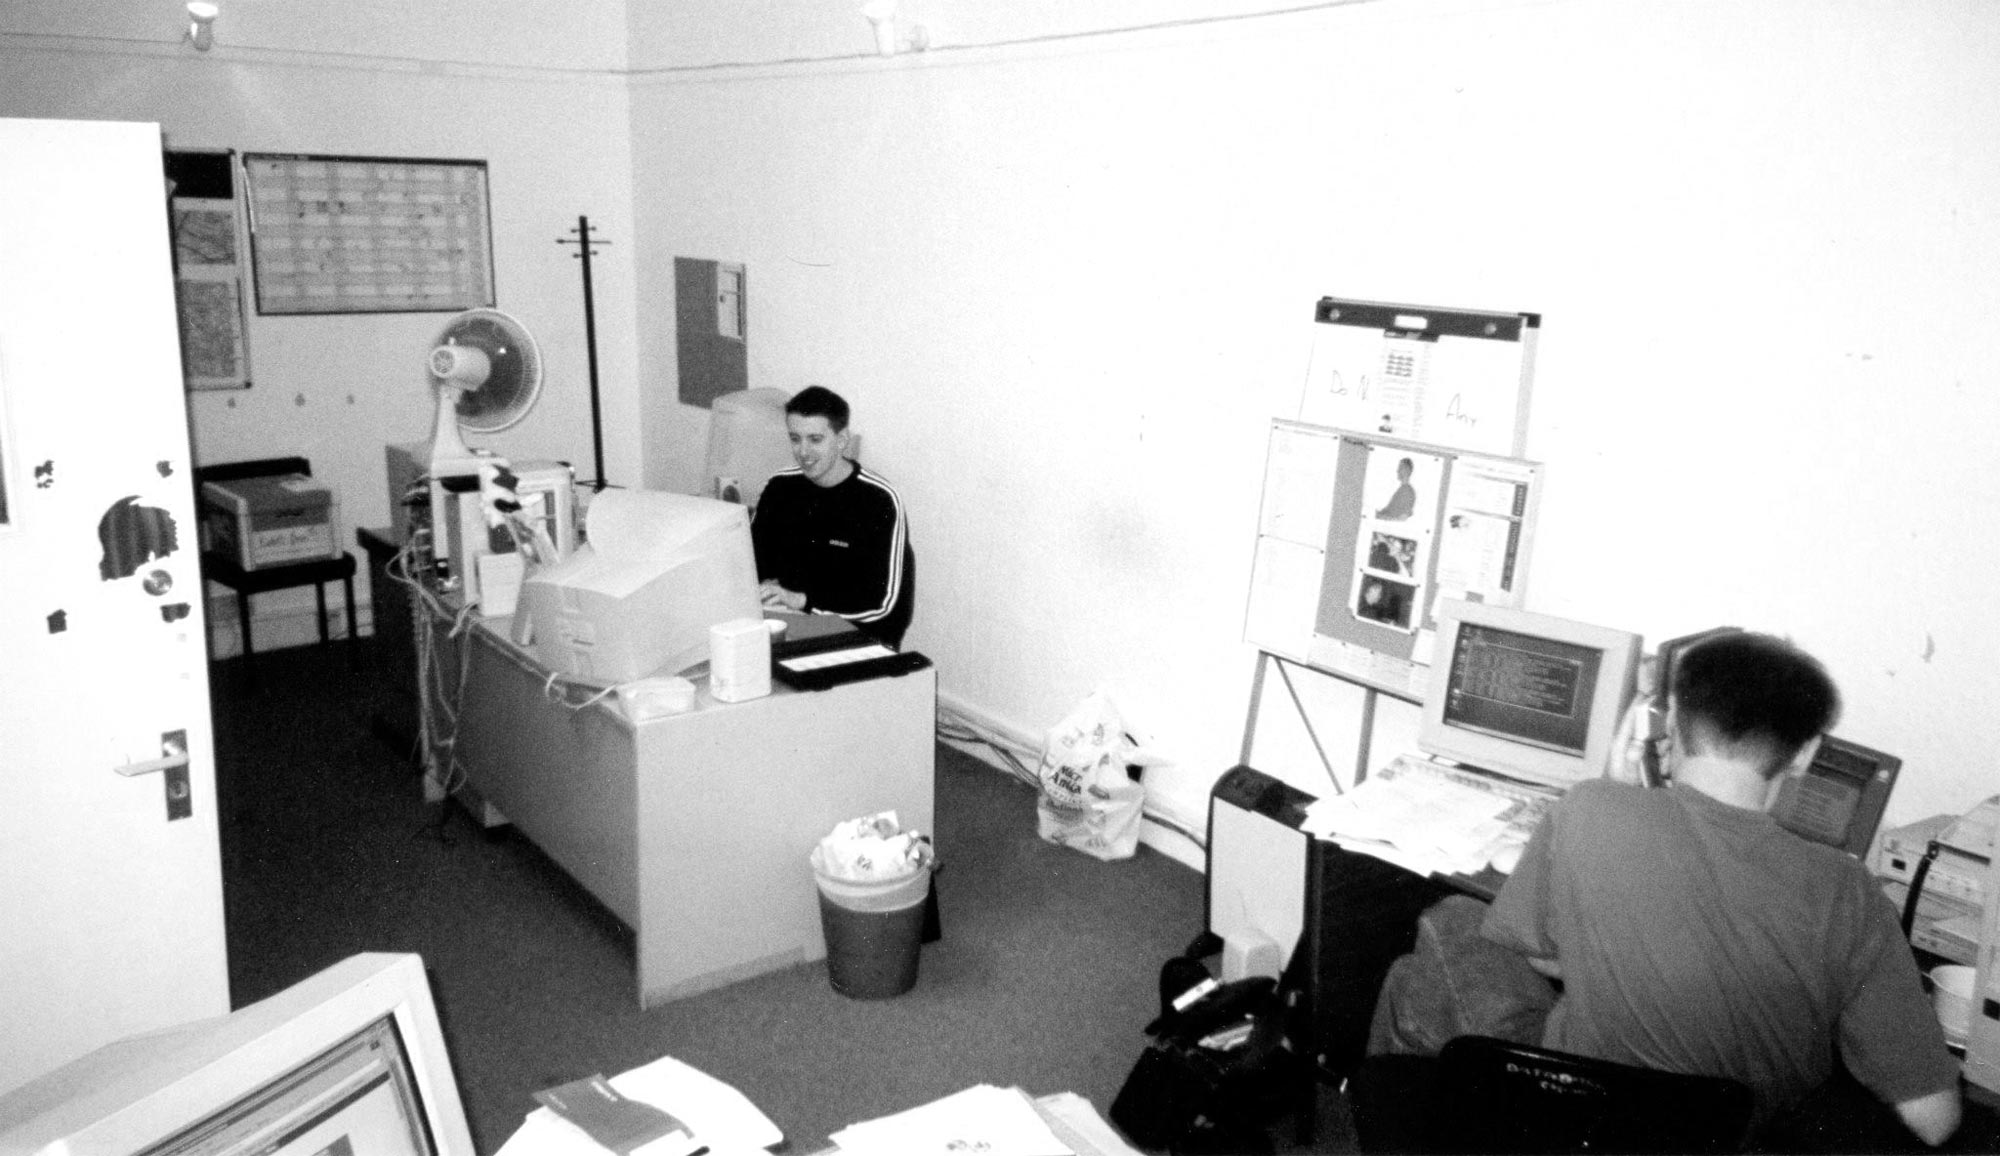 In the glamorous central London headquarters of Clockwork Web in 1997